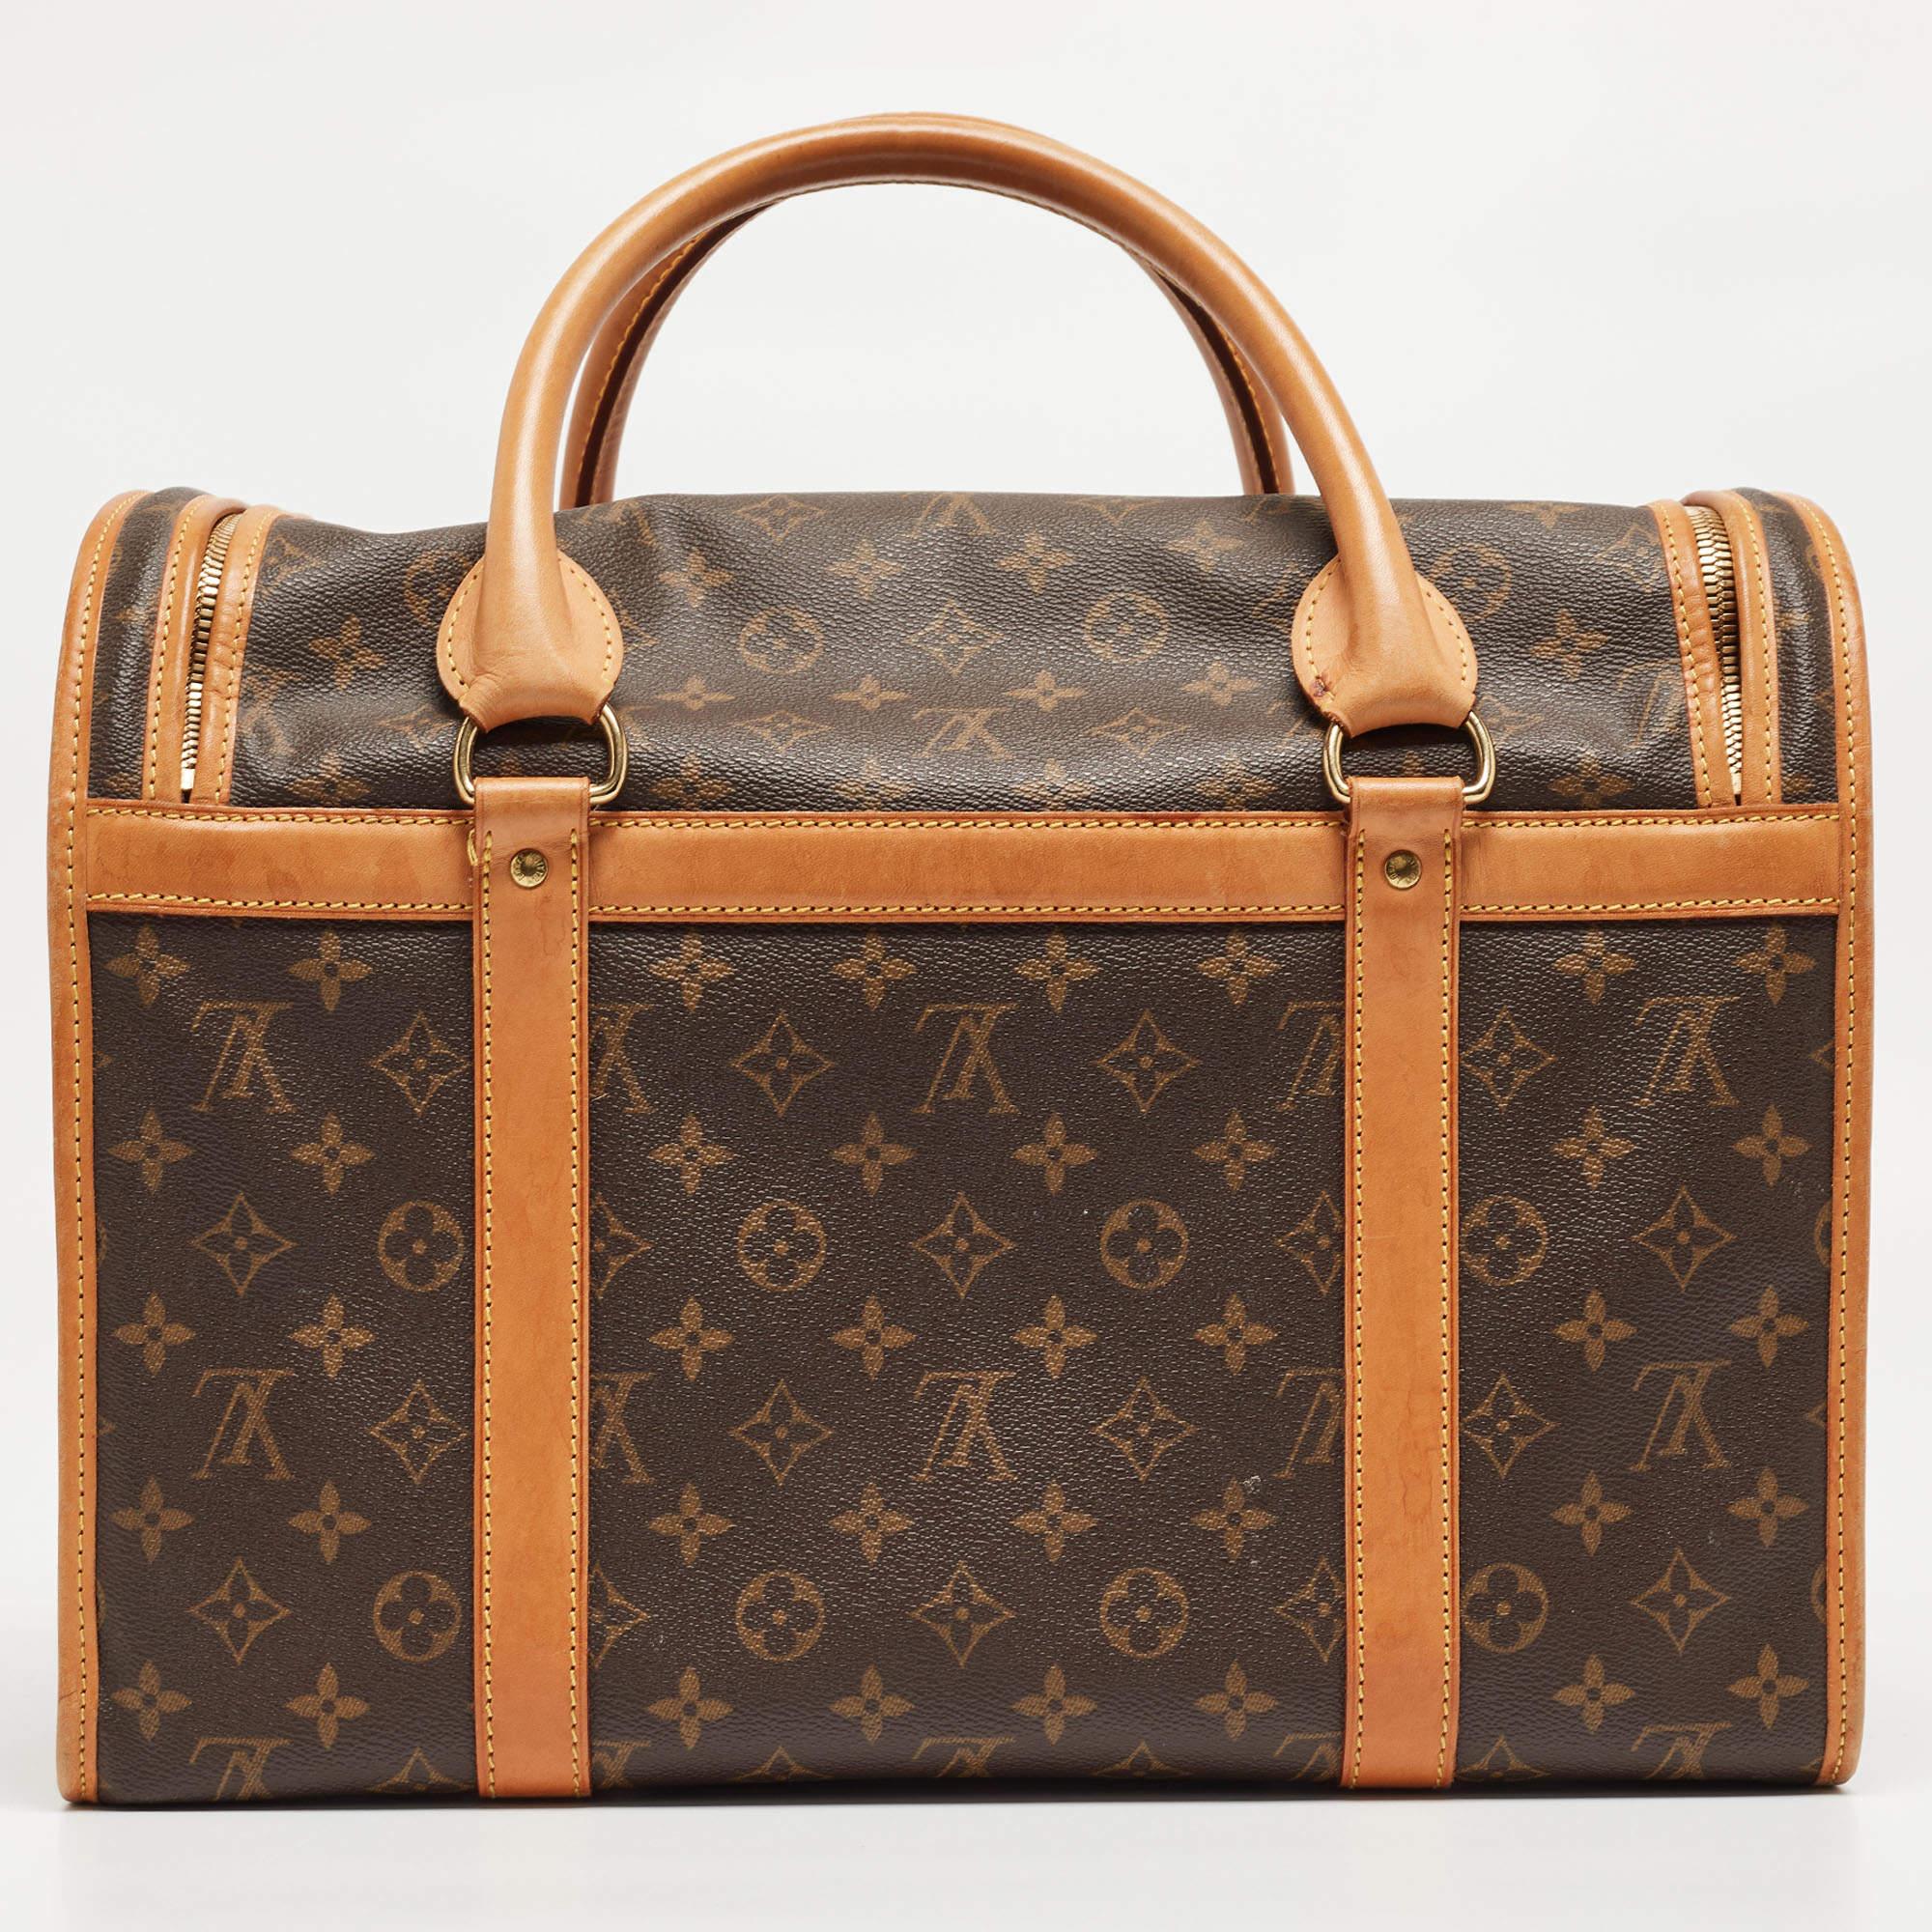 Everything falls short when we are talking about dogs and the love dog lovers bear for them. To extend this profound companionship all day long, Louis Vuitton brings you this ultra-chic and functional Dog Carrier bag. It's a lovely creation designed